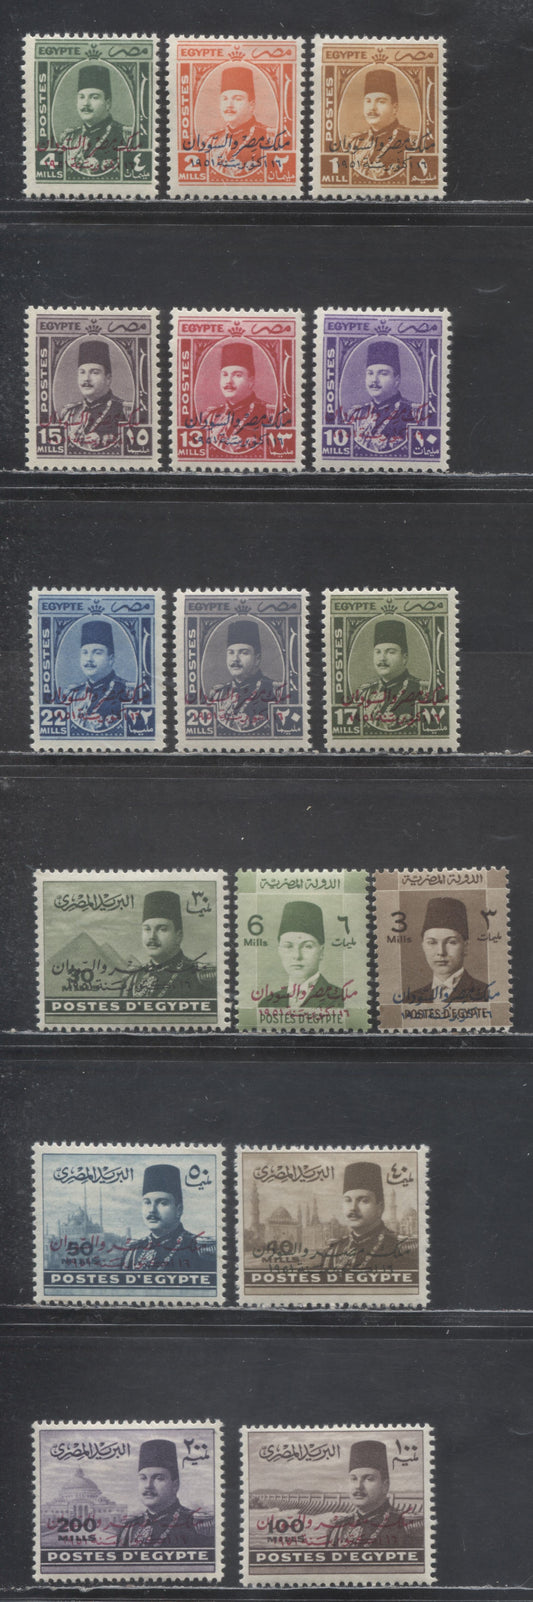 Lot 395 Egypt SC#299-314 1952 King Of Egypt & Sudan Overprints, 16 F/VFOG Singles, Click on Listing to See ALL Pictures, Estimated Value $18